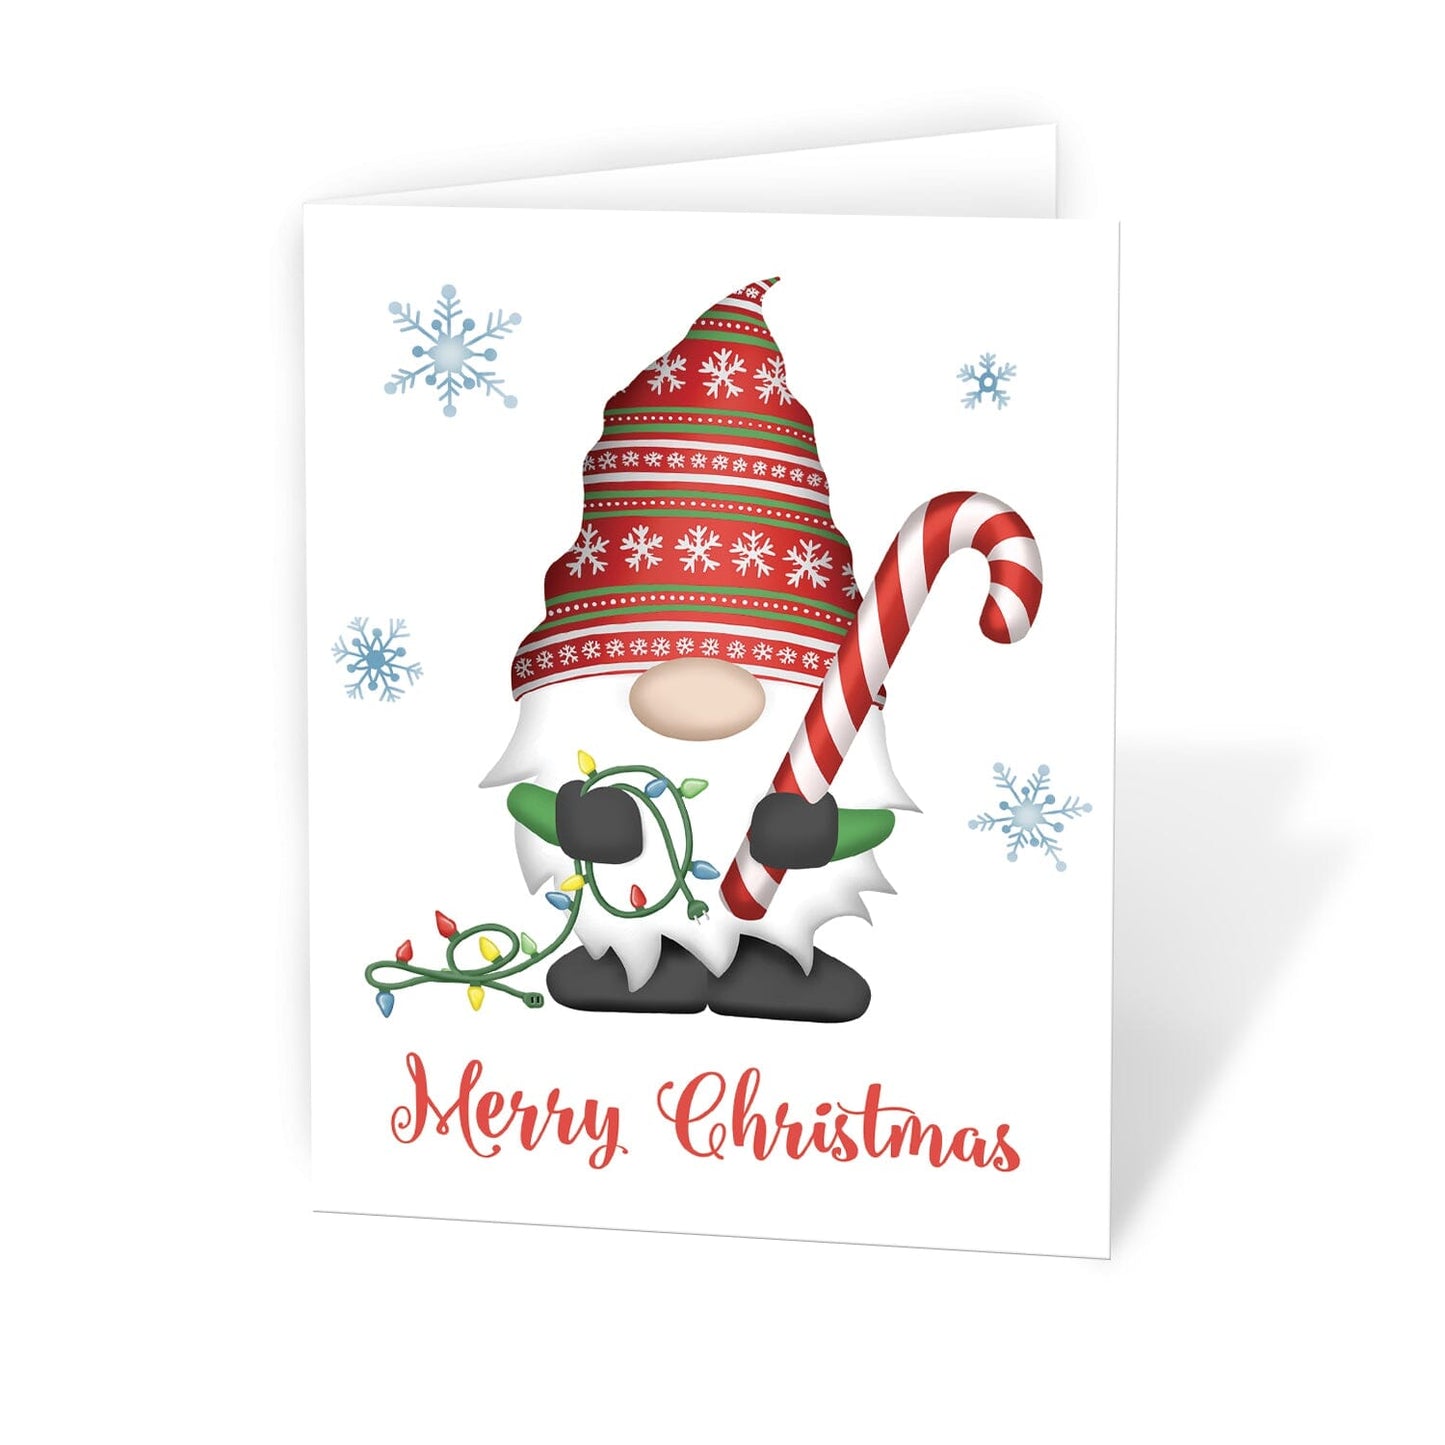 Holiday Gnome Christmas Cards at Artistically Invited. Cute holiday gnome Christmas cards with an illustration of a holiday gnome wearing a red and green festive hat, holding a string of Christmas lights and a large candy cane, and snowflakes around it.